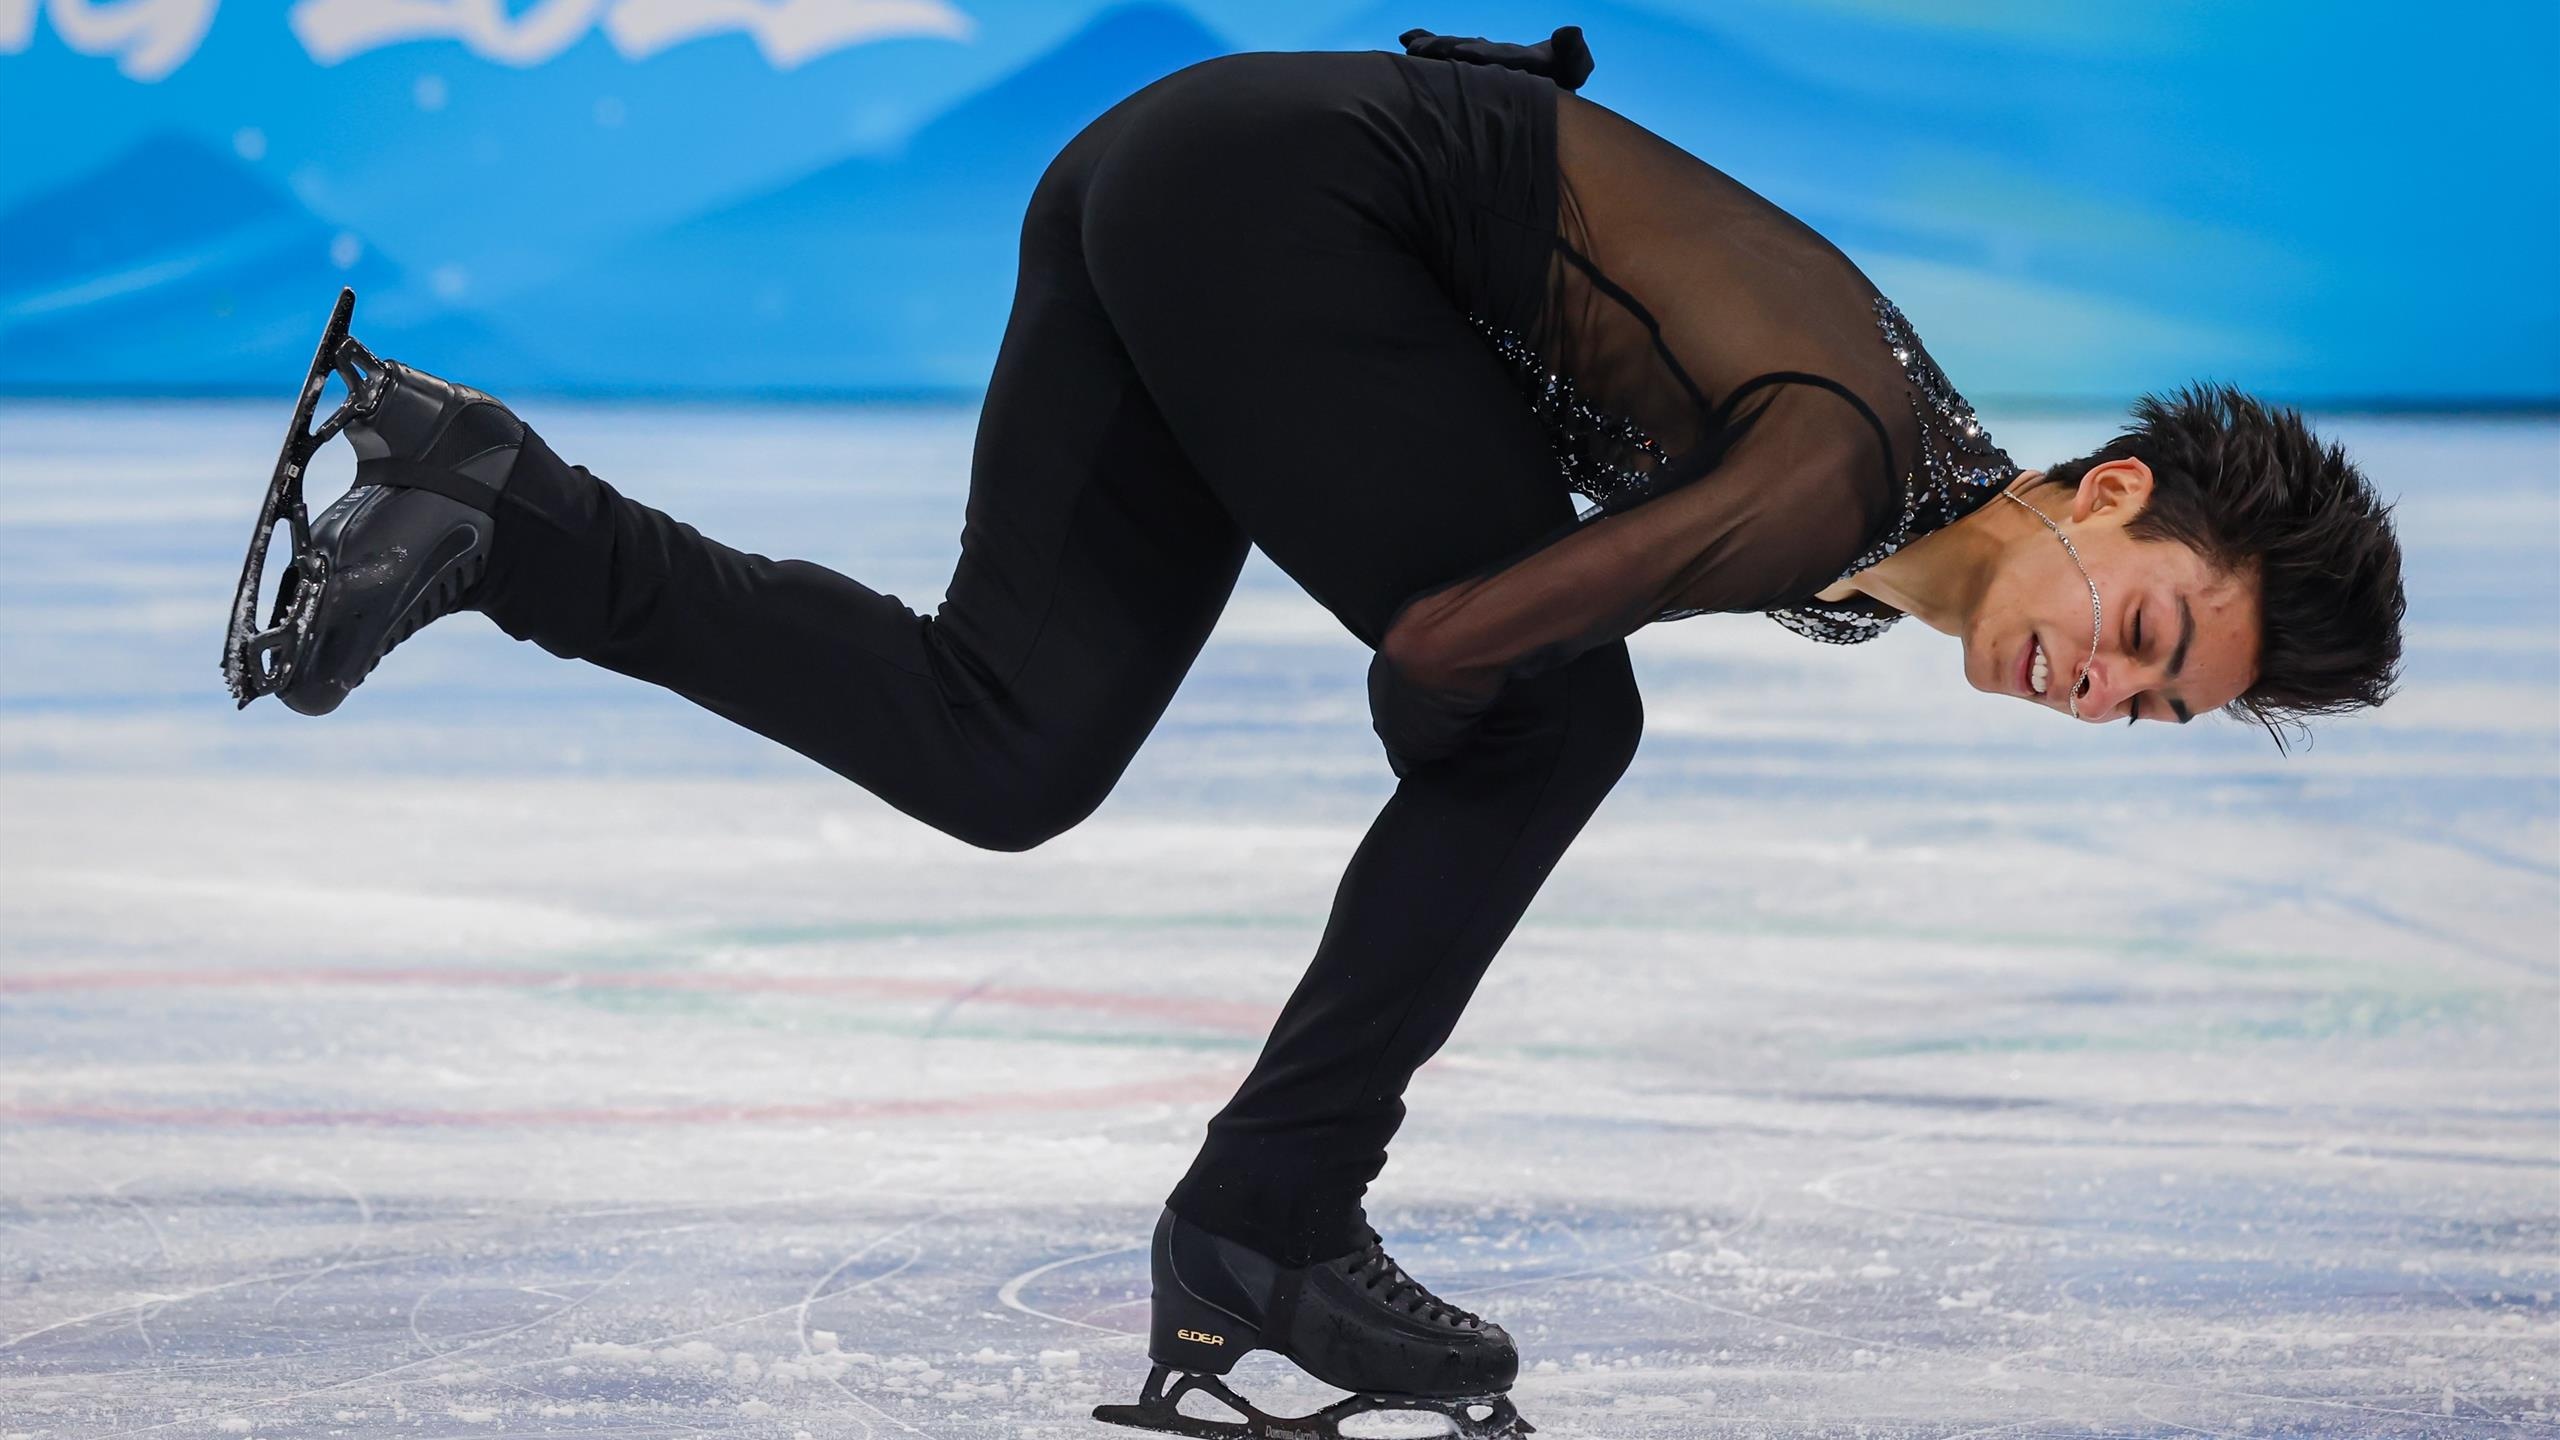 Single Skating: Donovan Carrillo, The 2019 Philadelphia International silver medalist and a four-time Mexican national champion. 2560x1440 HD Wallpaper.